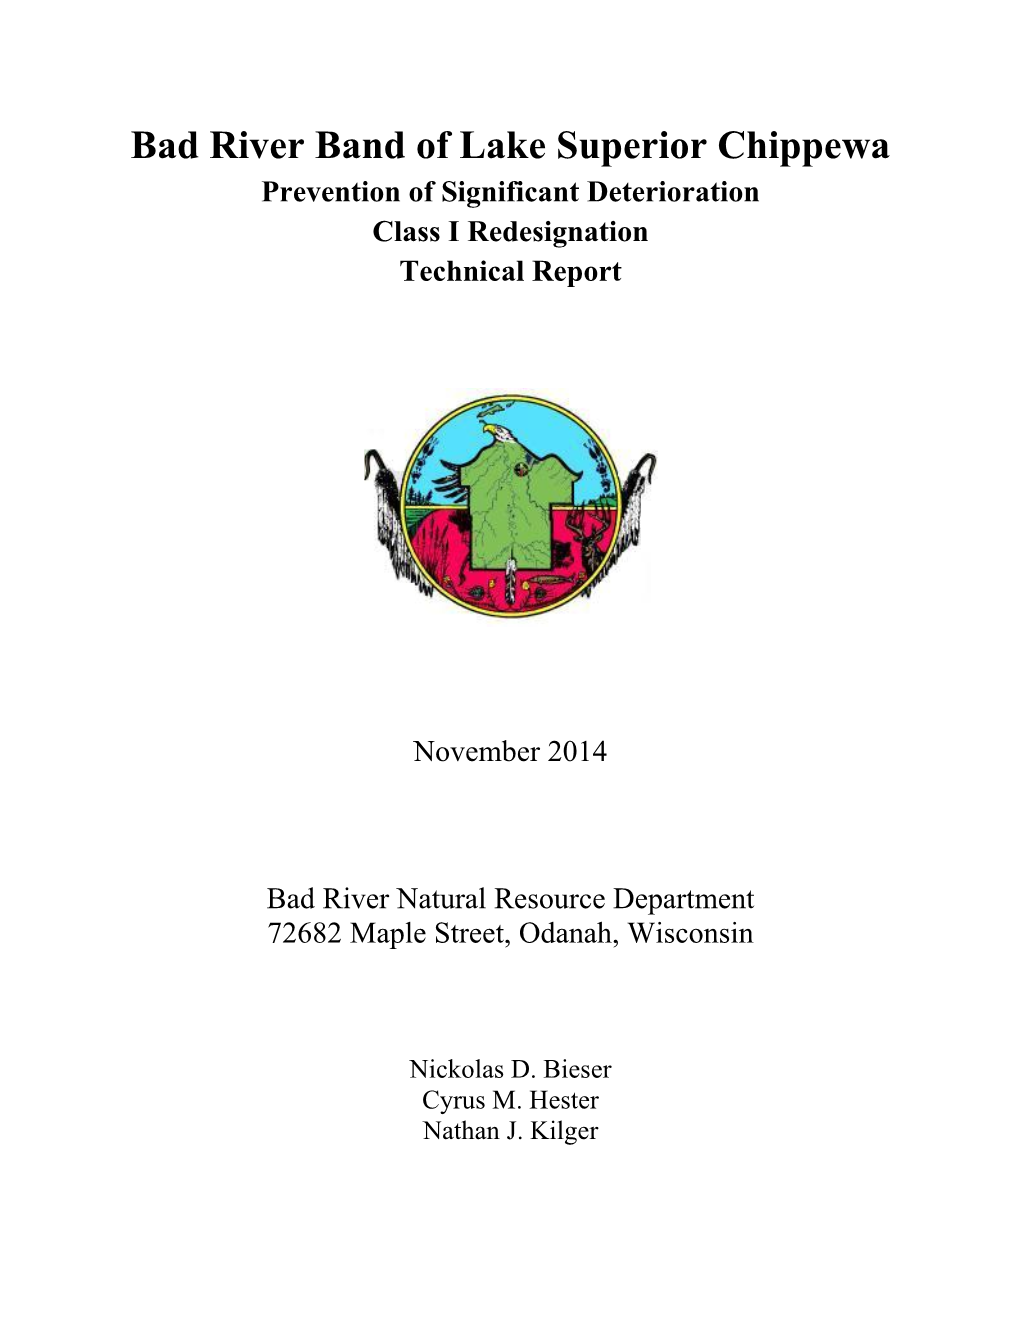 Bad River Band of Lake Superior Chippewa Prevention of Significant Deterioration Class I Redesignation Technical Report